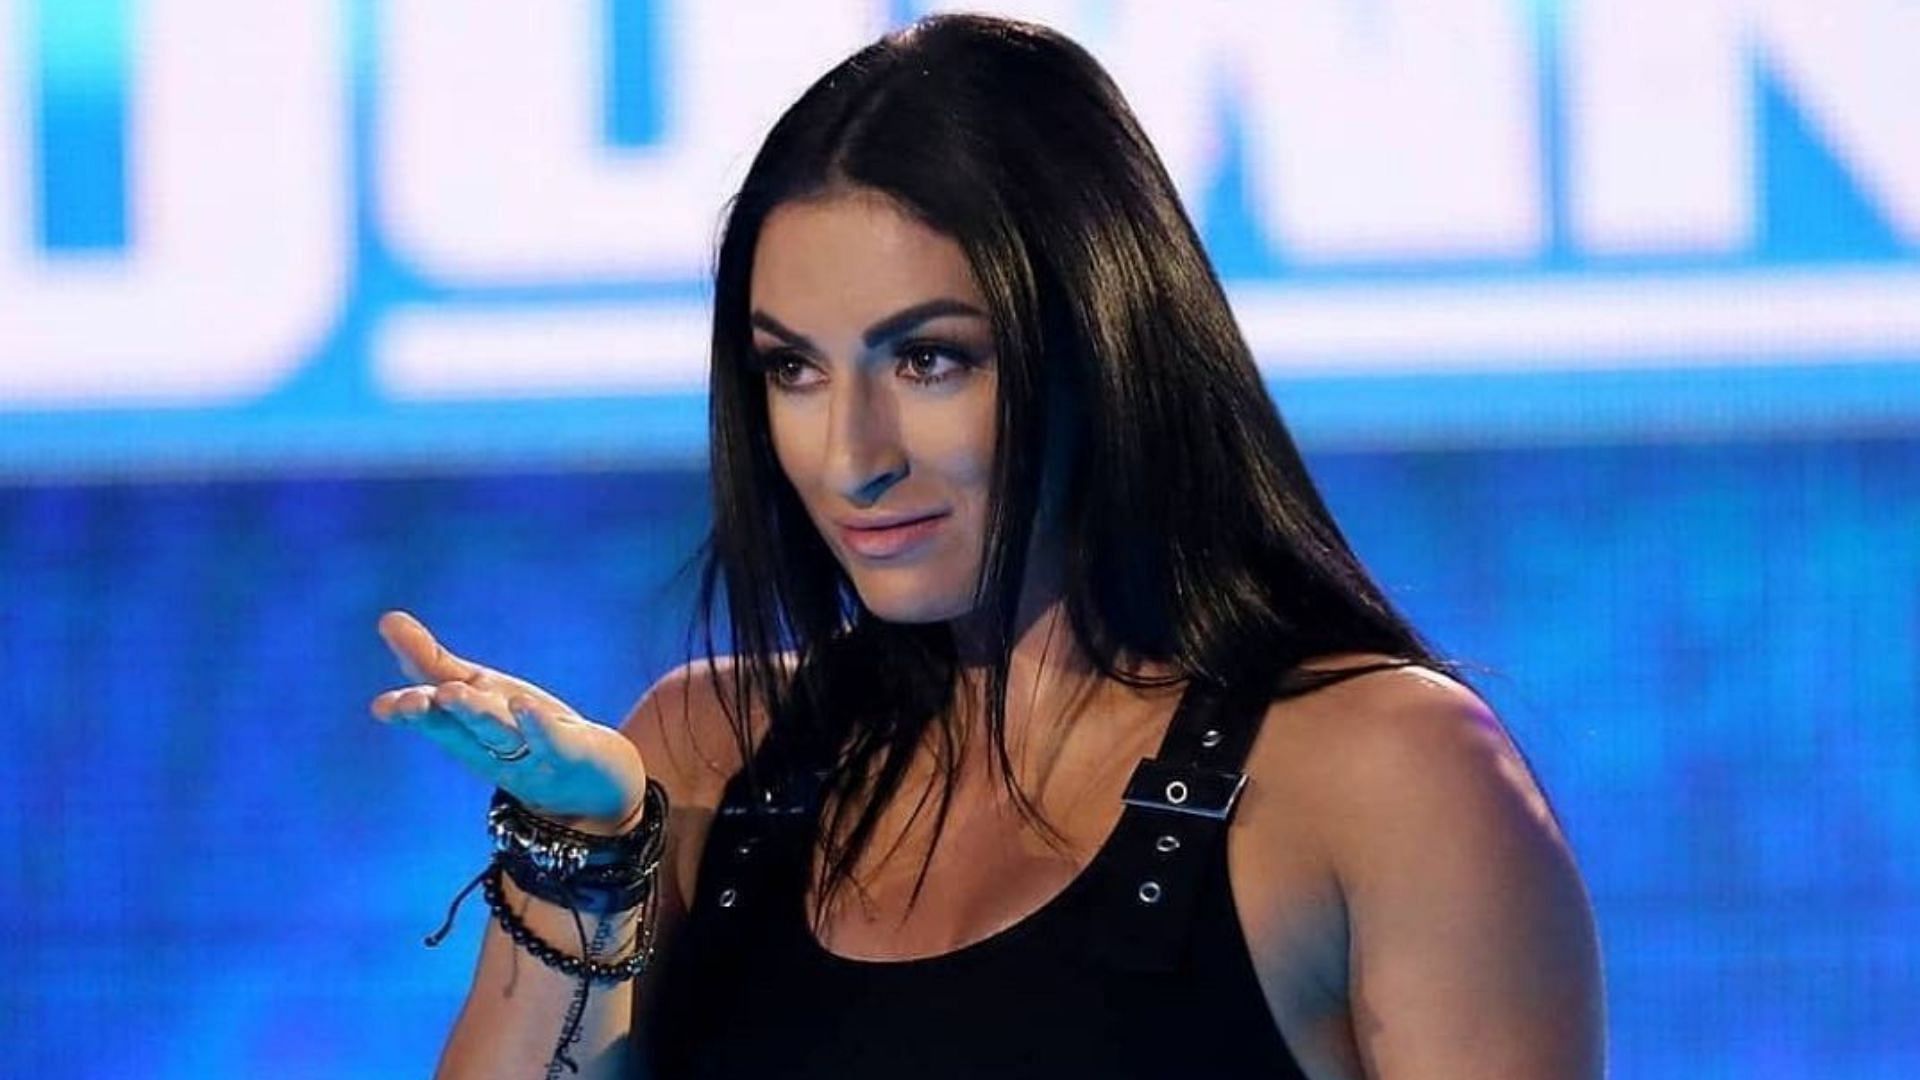 Sonya Deville and Natalya were eliminated in the semi-final round of the WWE Women